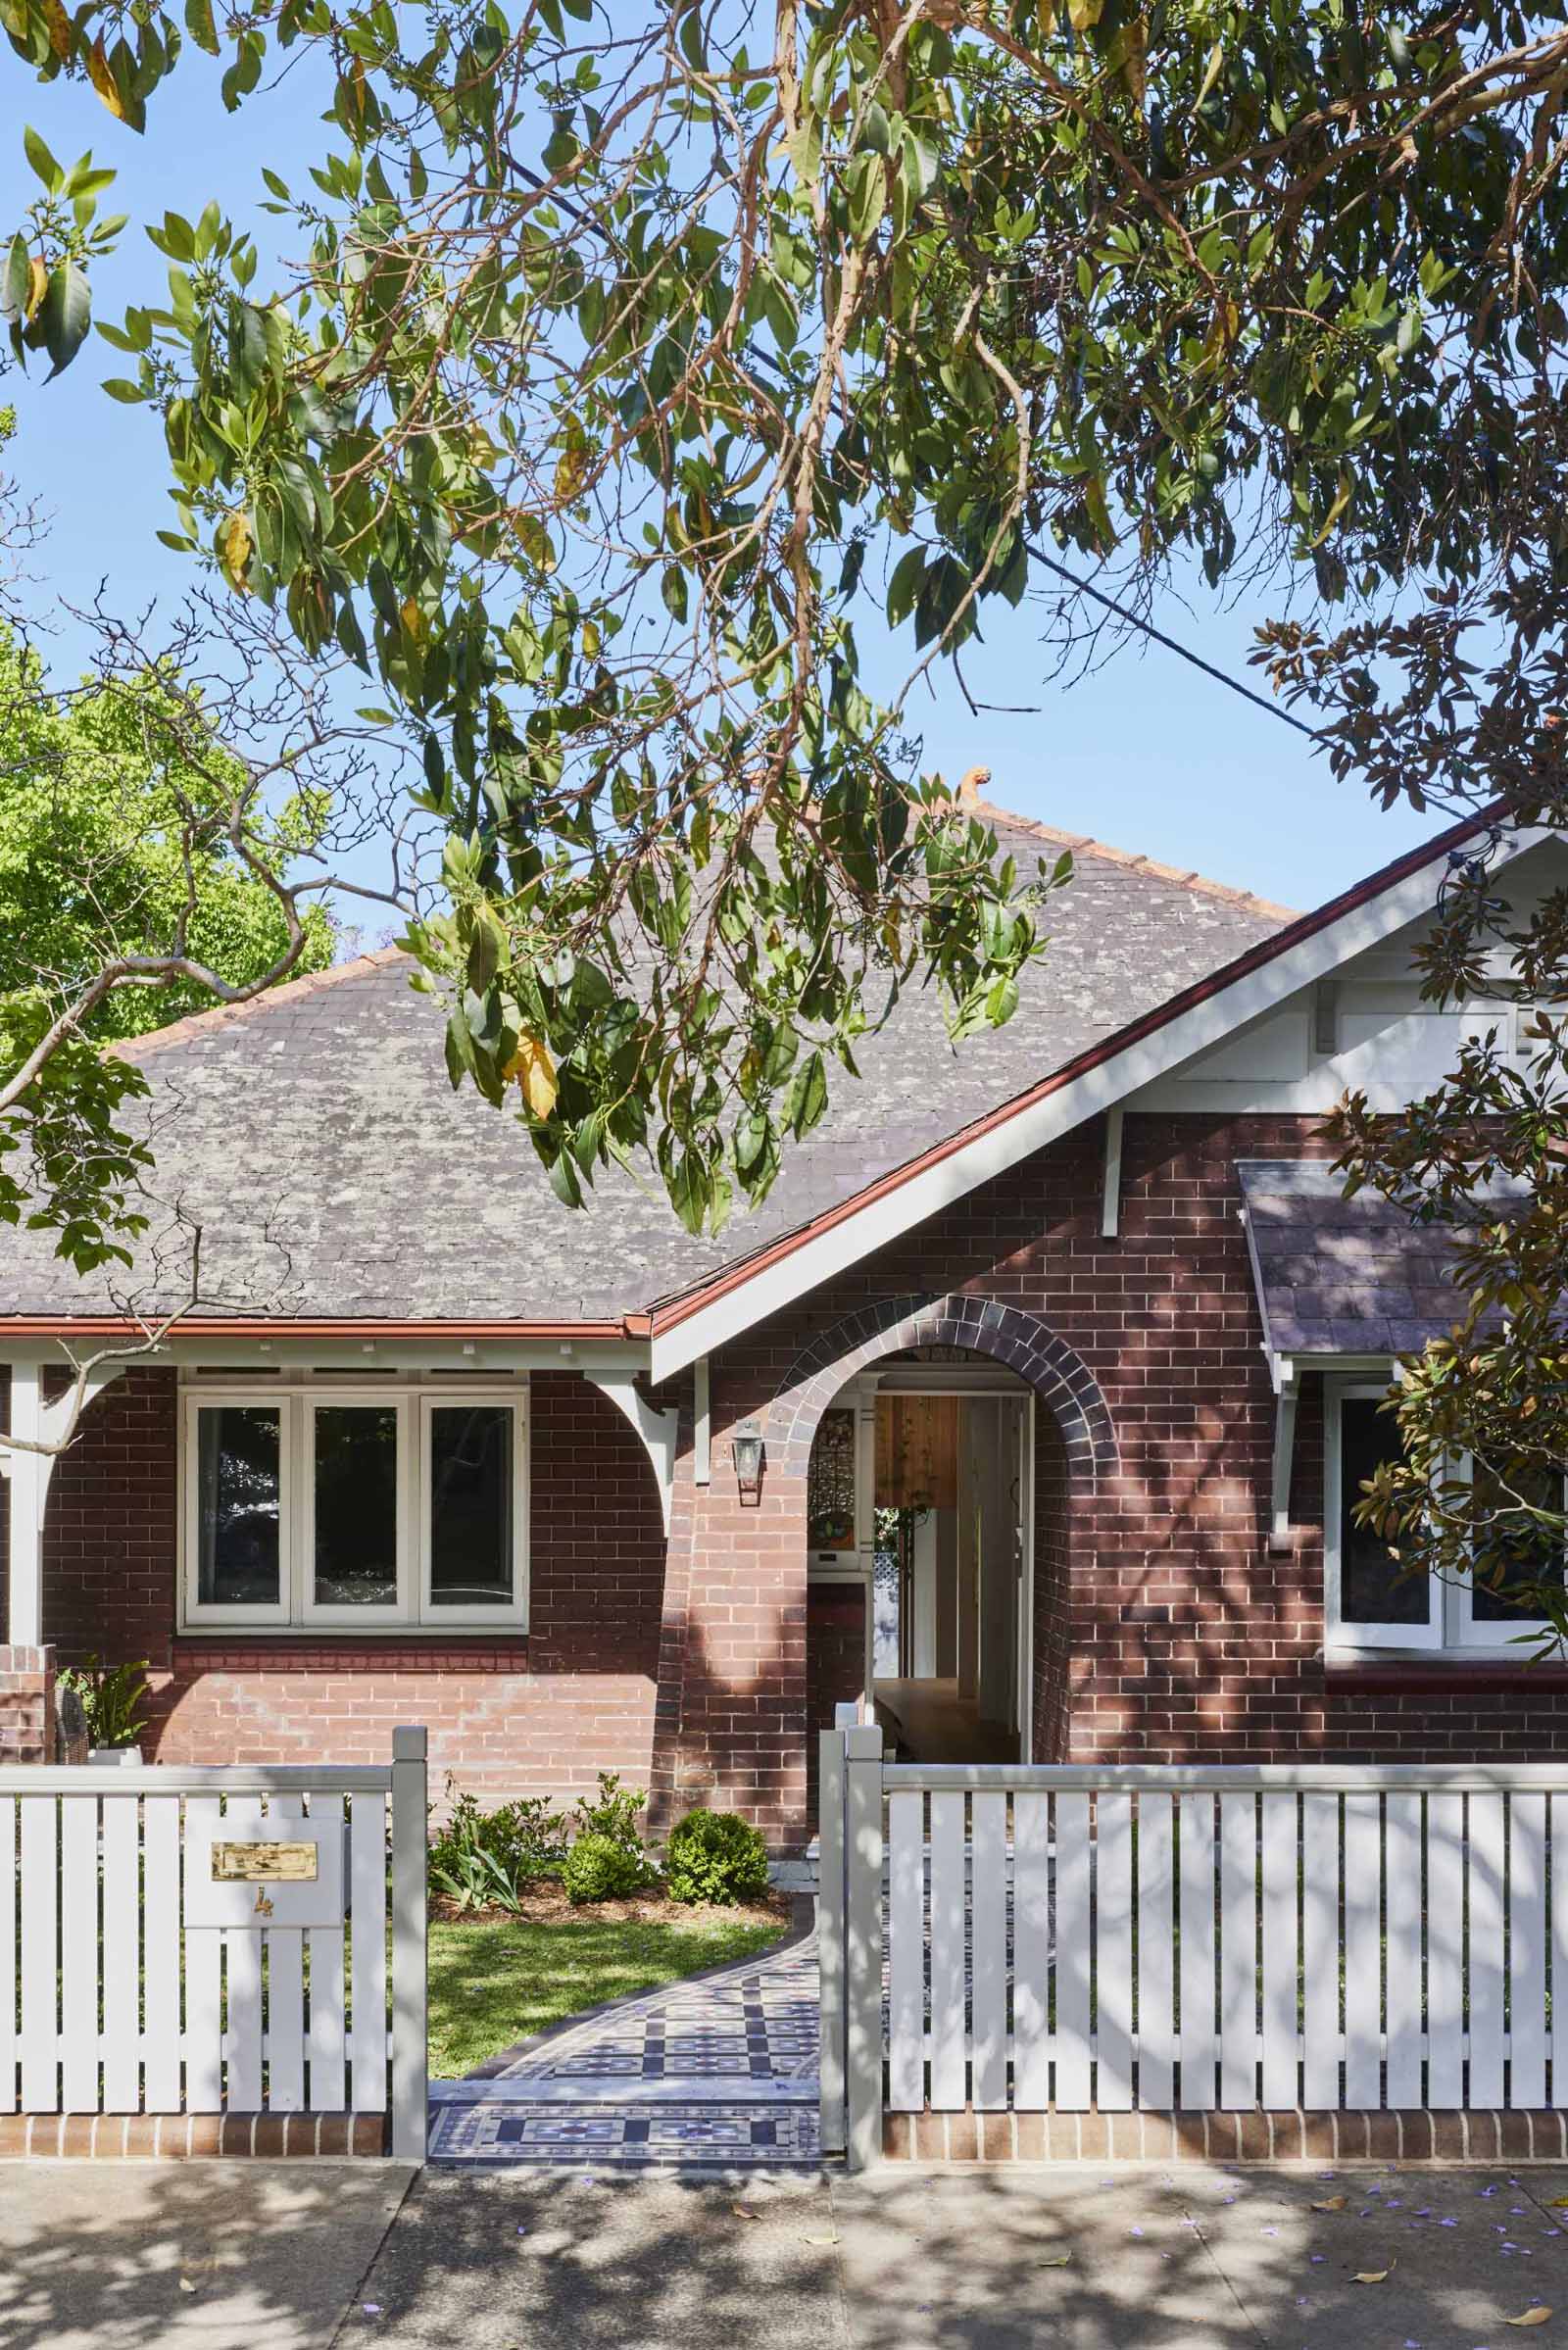 A new home extension designed for an Australian house in a heritage conservation area.